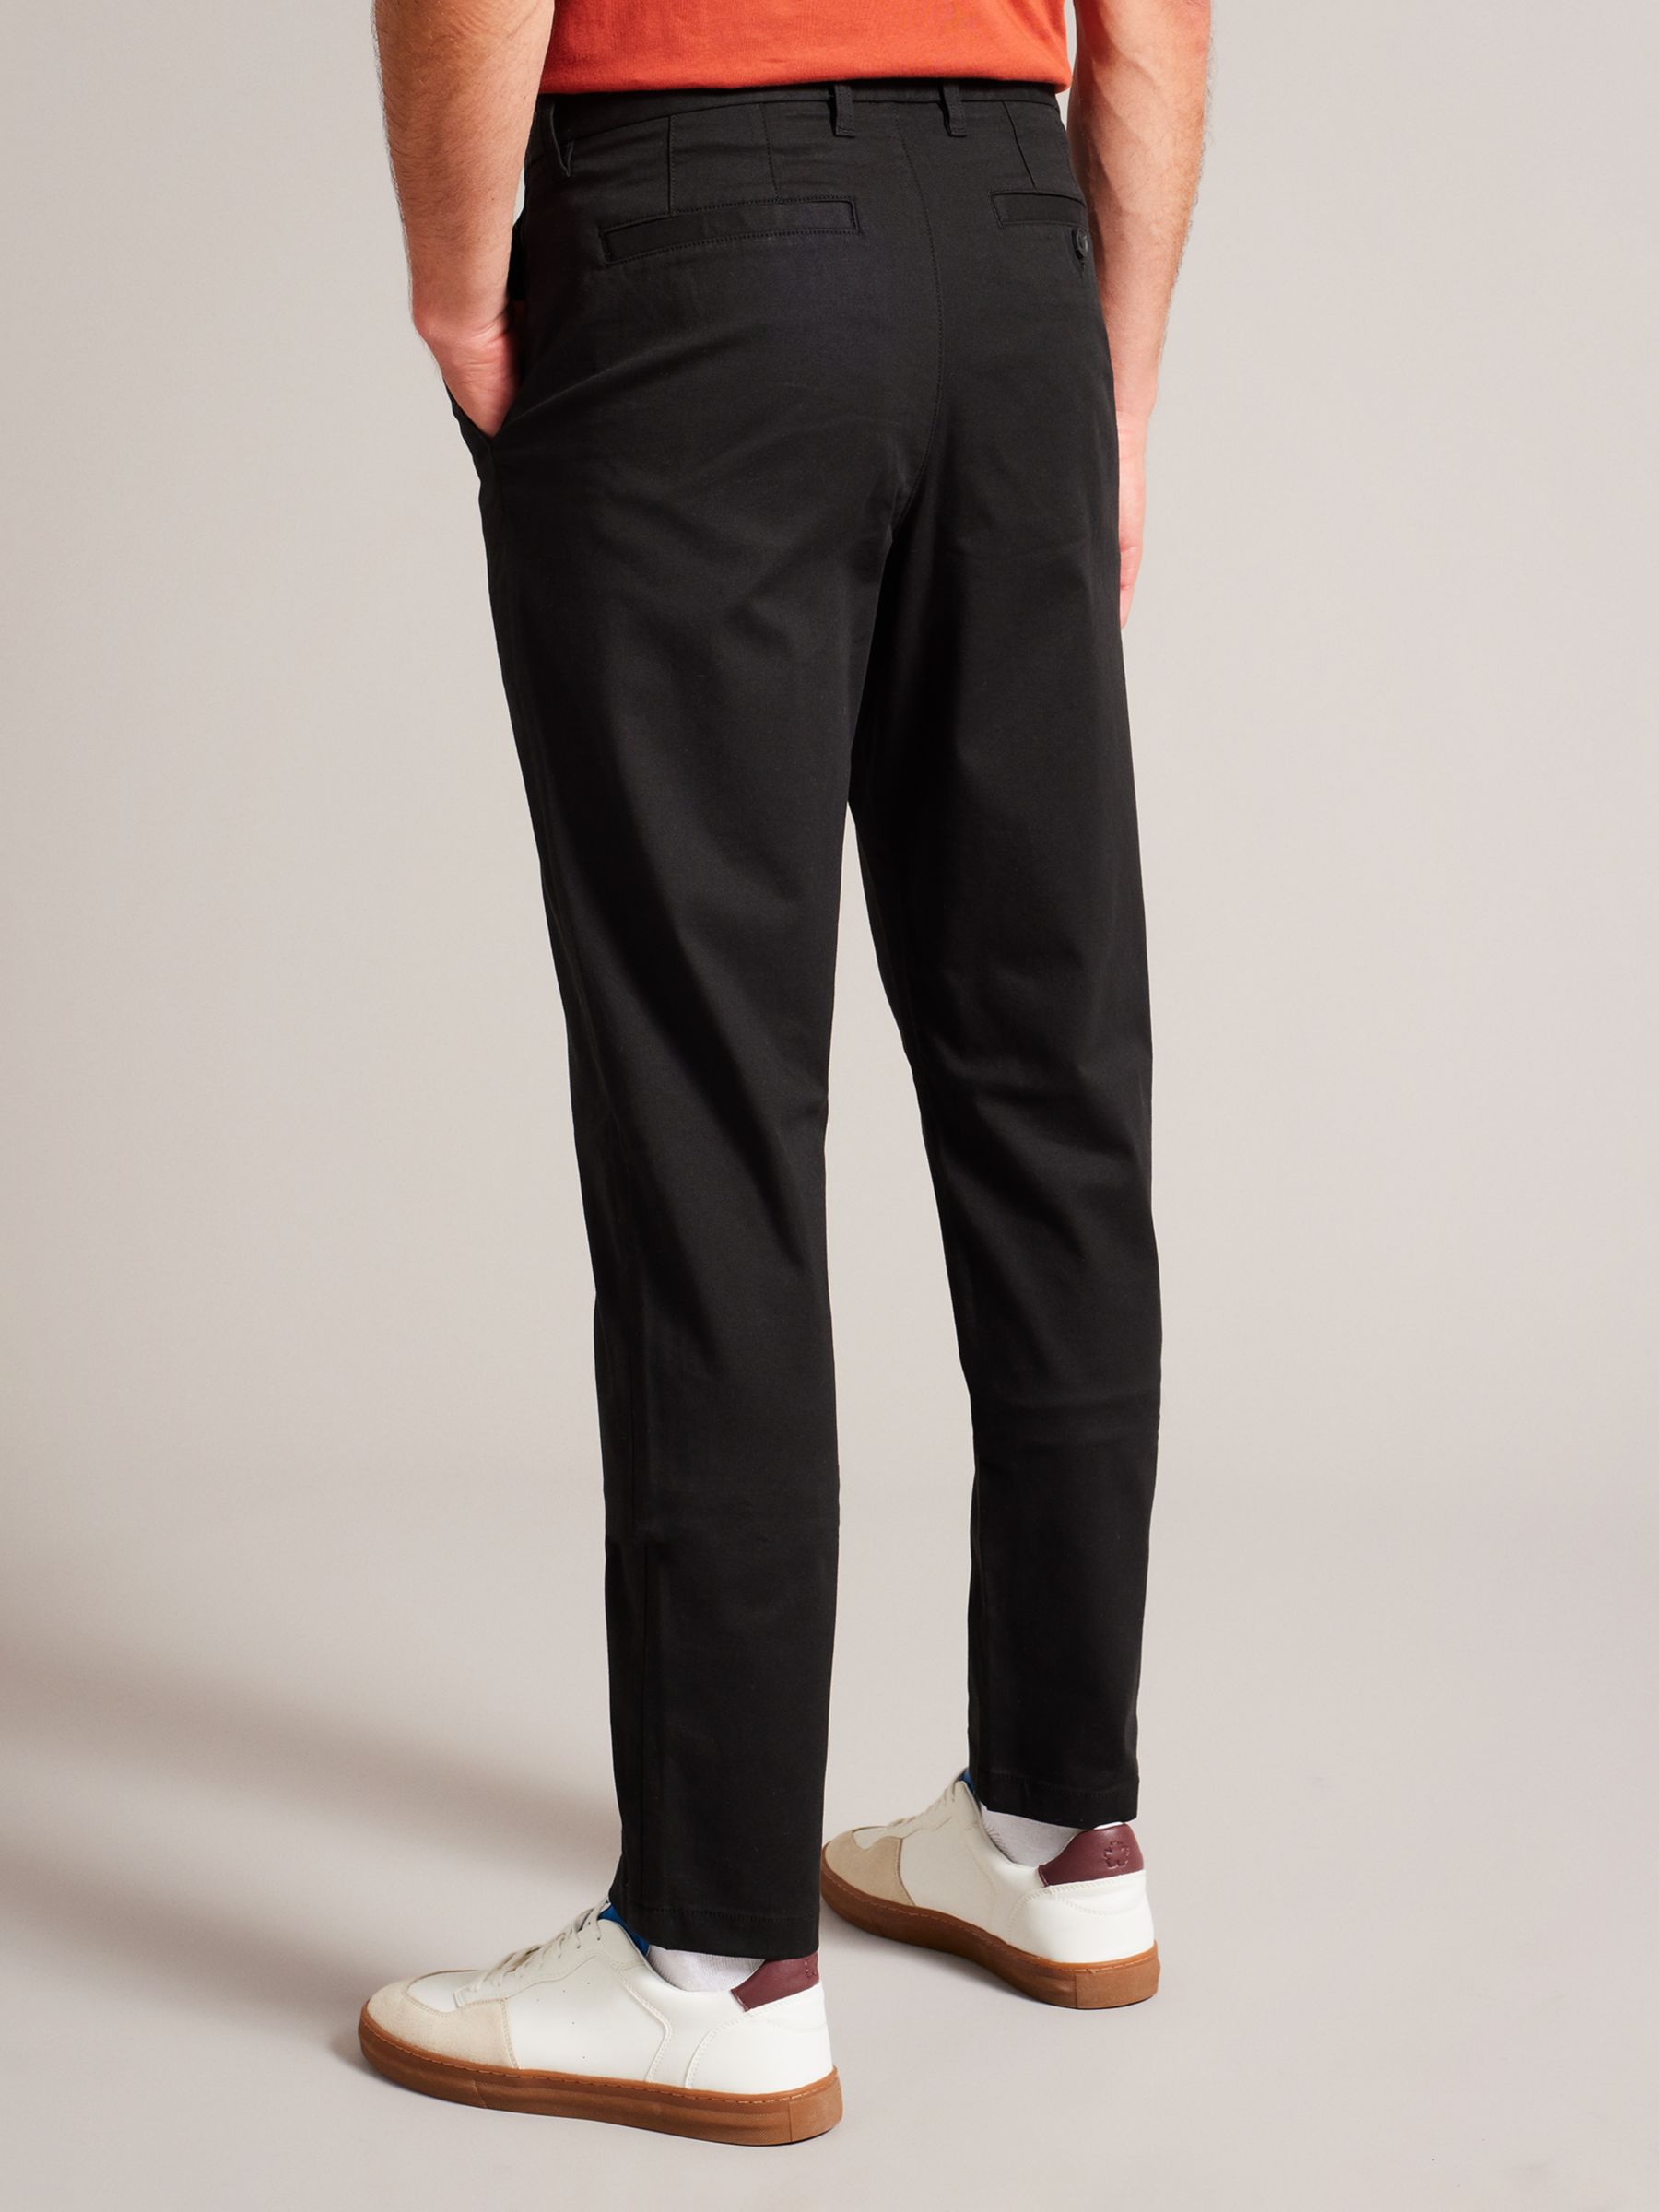 Ted Baker Haybrn Blue Navy Chino Trouser, Black at John Lewis & Partners